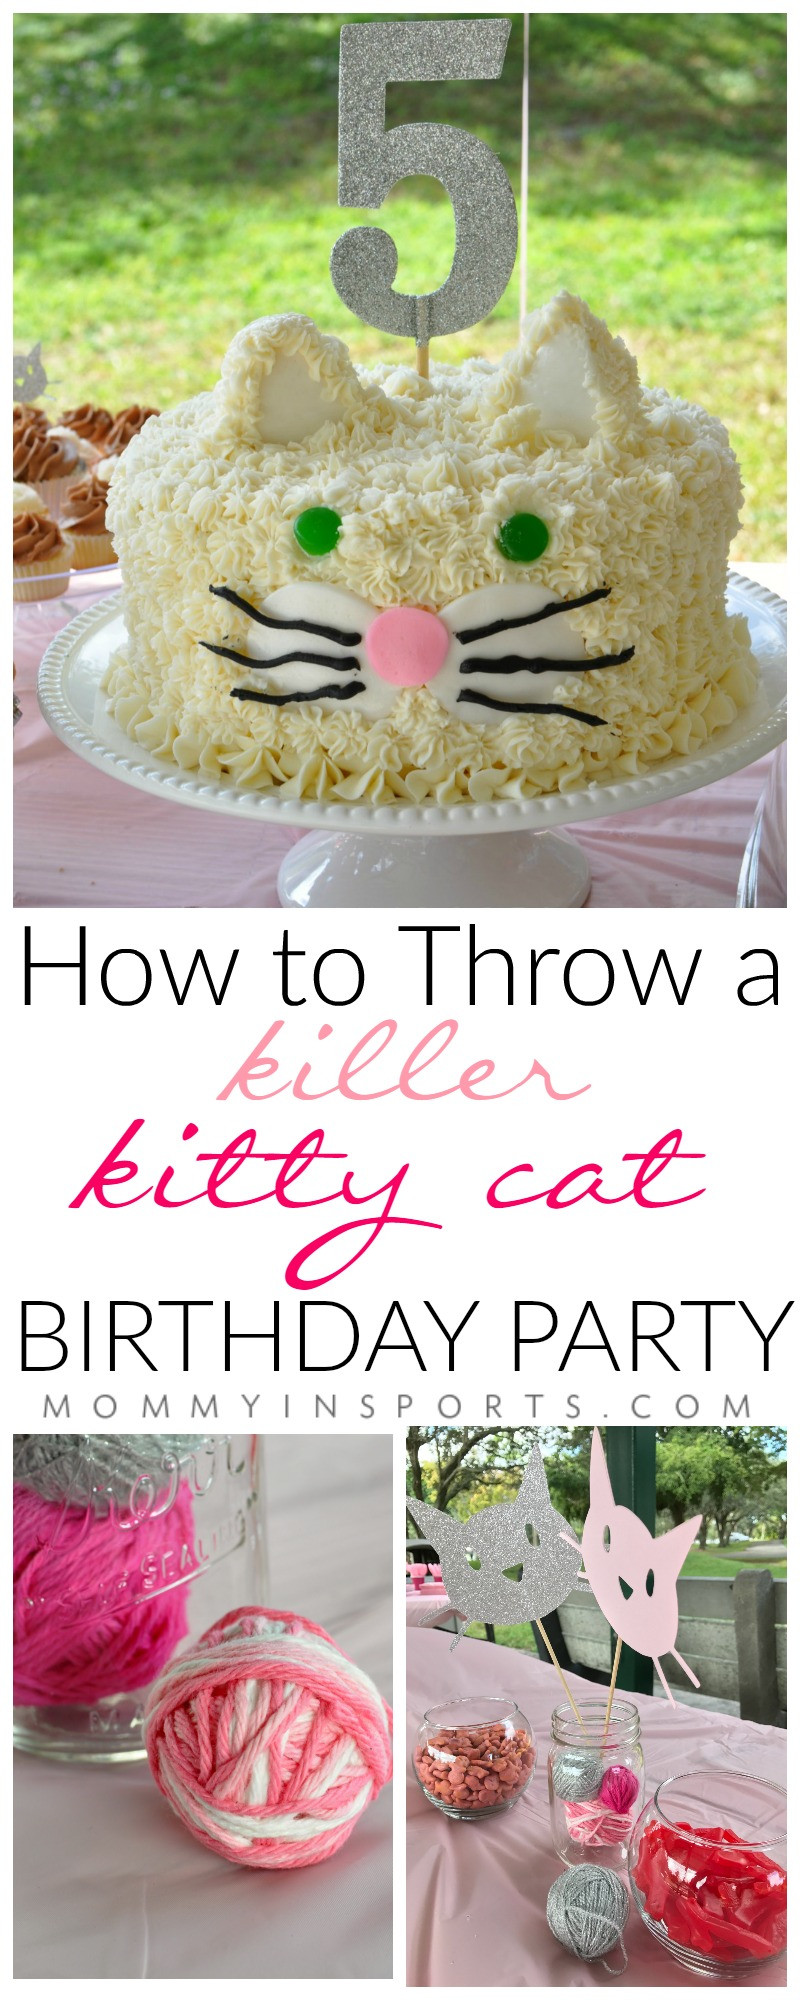 Cat Birthday Party
 How to Throw A Killer Kitty Cat Birthday Party Kristen